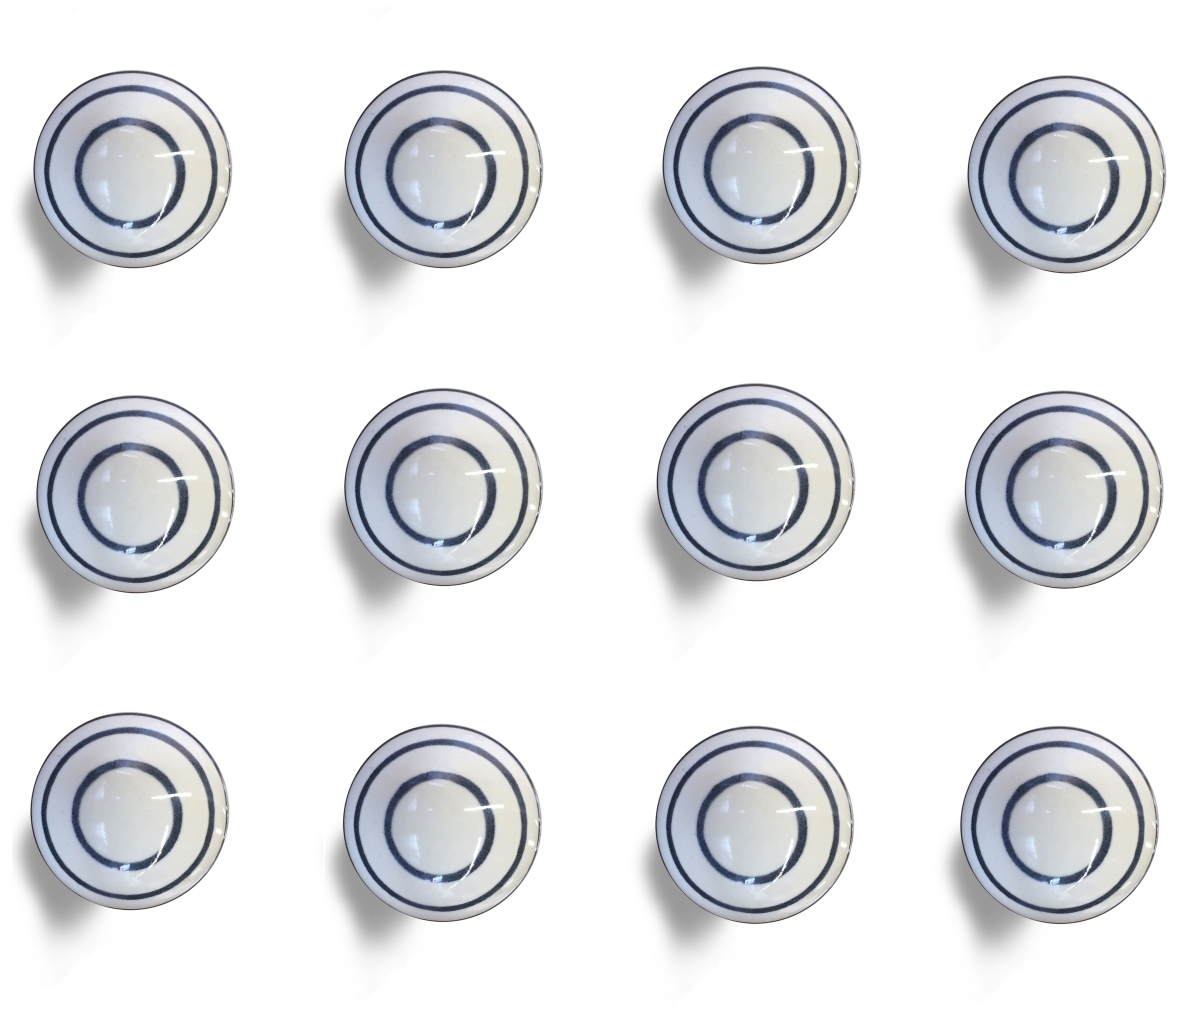 676685032935 Vintage Hand Painted Round Knob Set - White & Blue - Pack Of 12